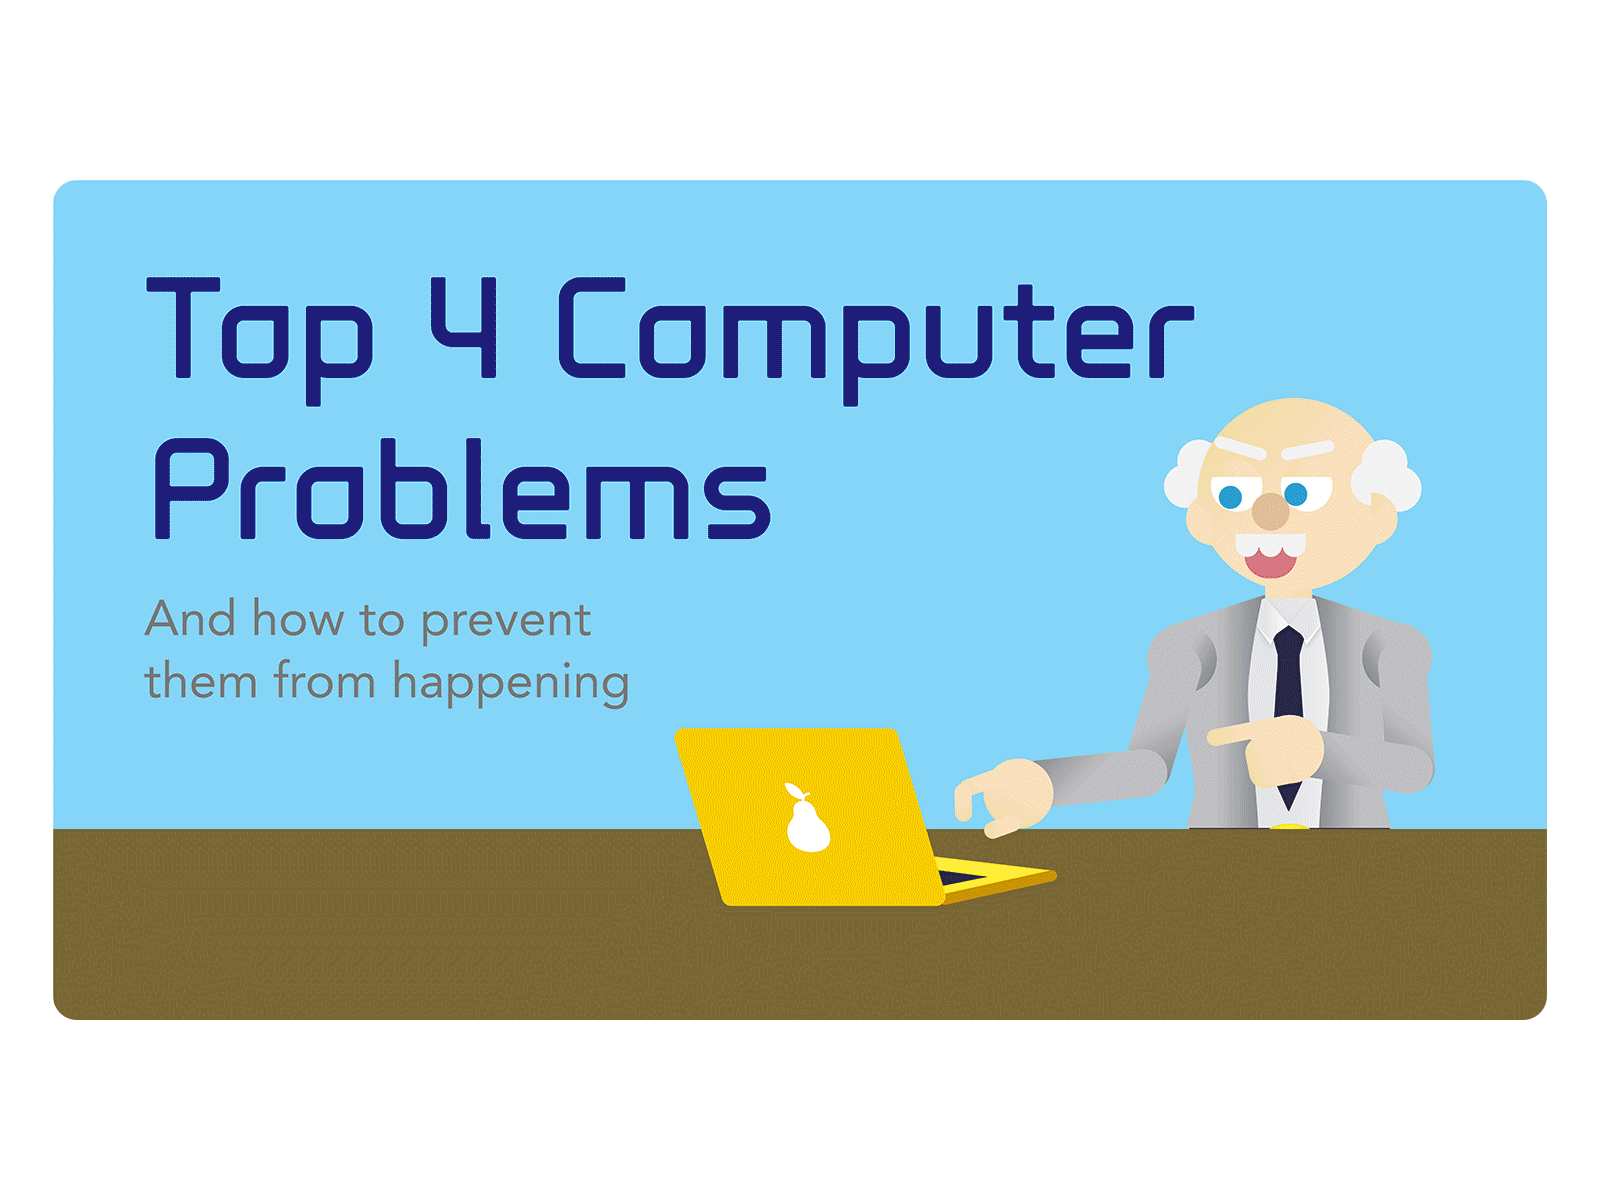 HDWC Top 5 Computer Problems and how to stop YouTube Video 2020 character character animation characterdesign characters design dribbble graphic design graphicdesign illustraion illustration illustration art illustrations illustrator vector video youtube youtube channel youtuber